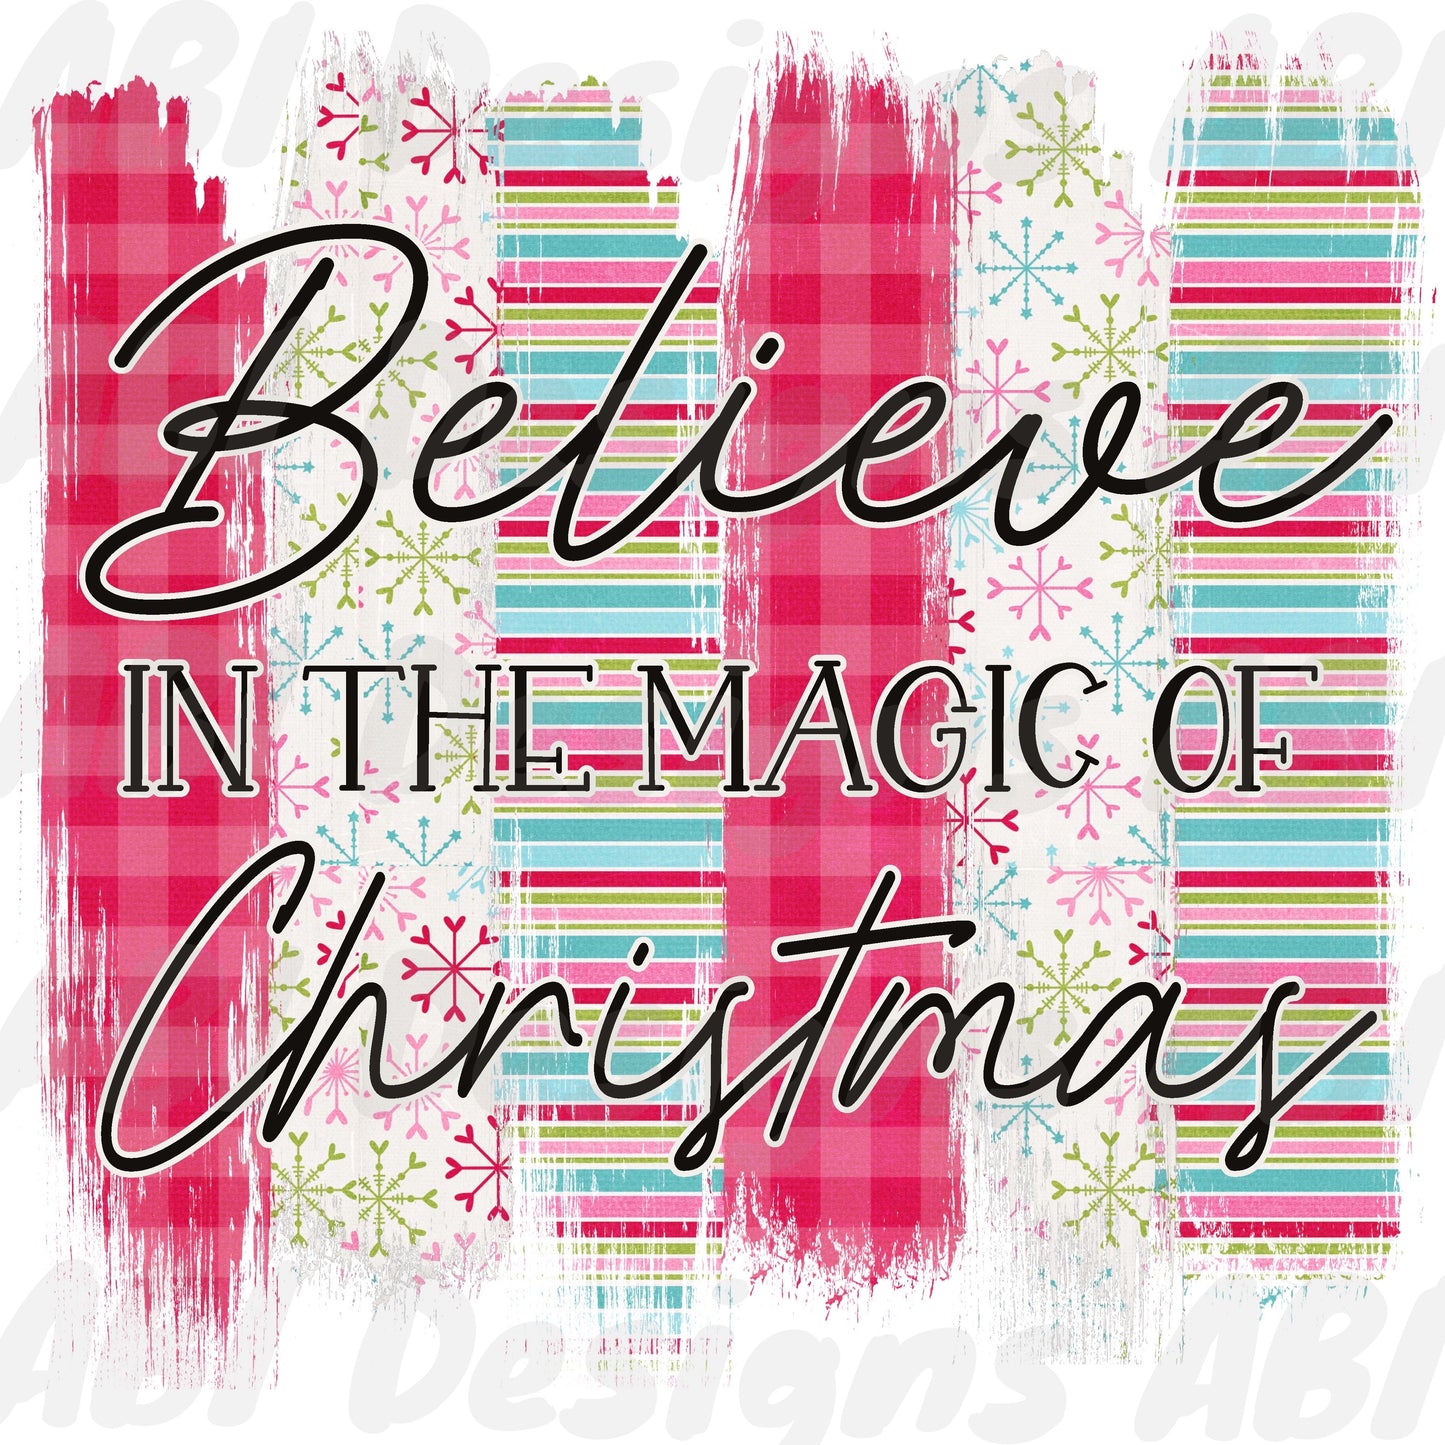 Believe in the magic of christmas - Sublimation